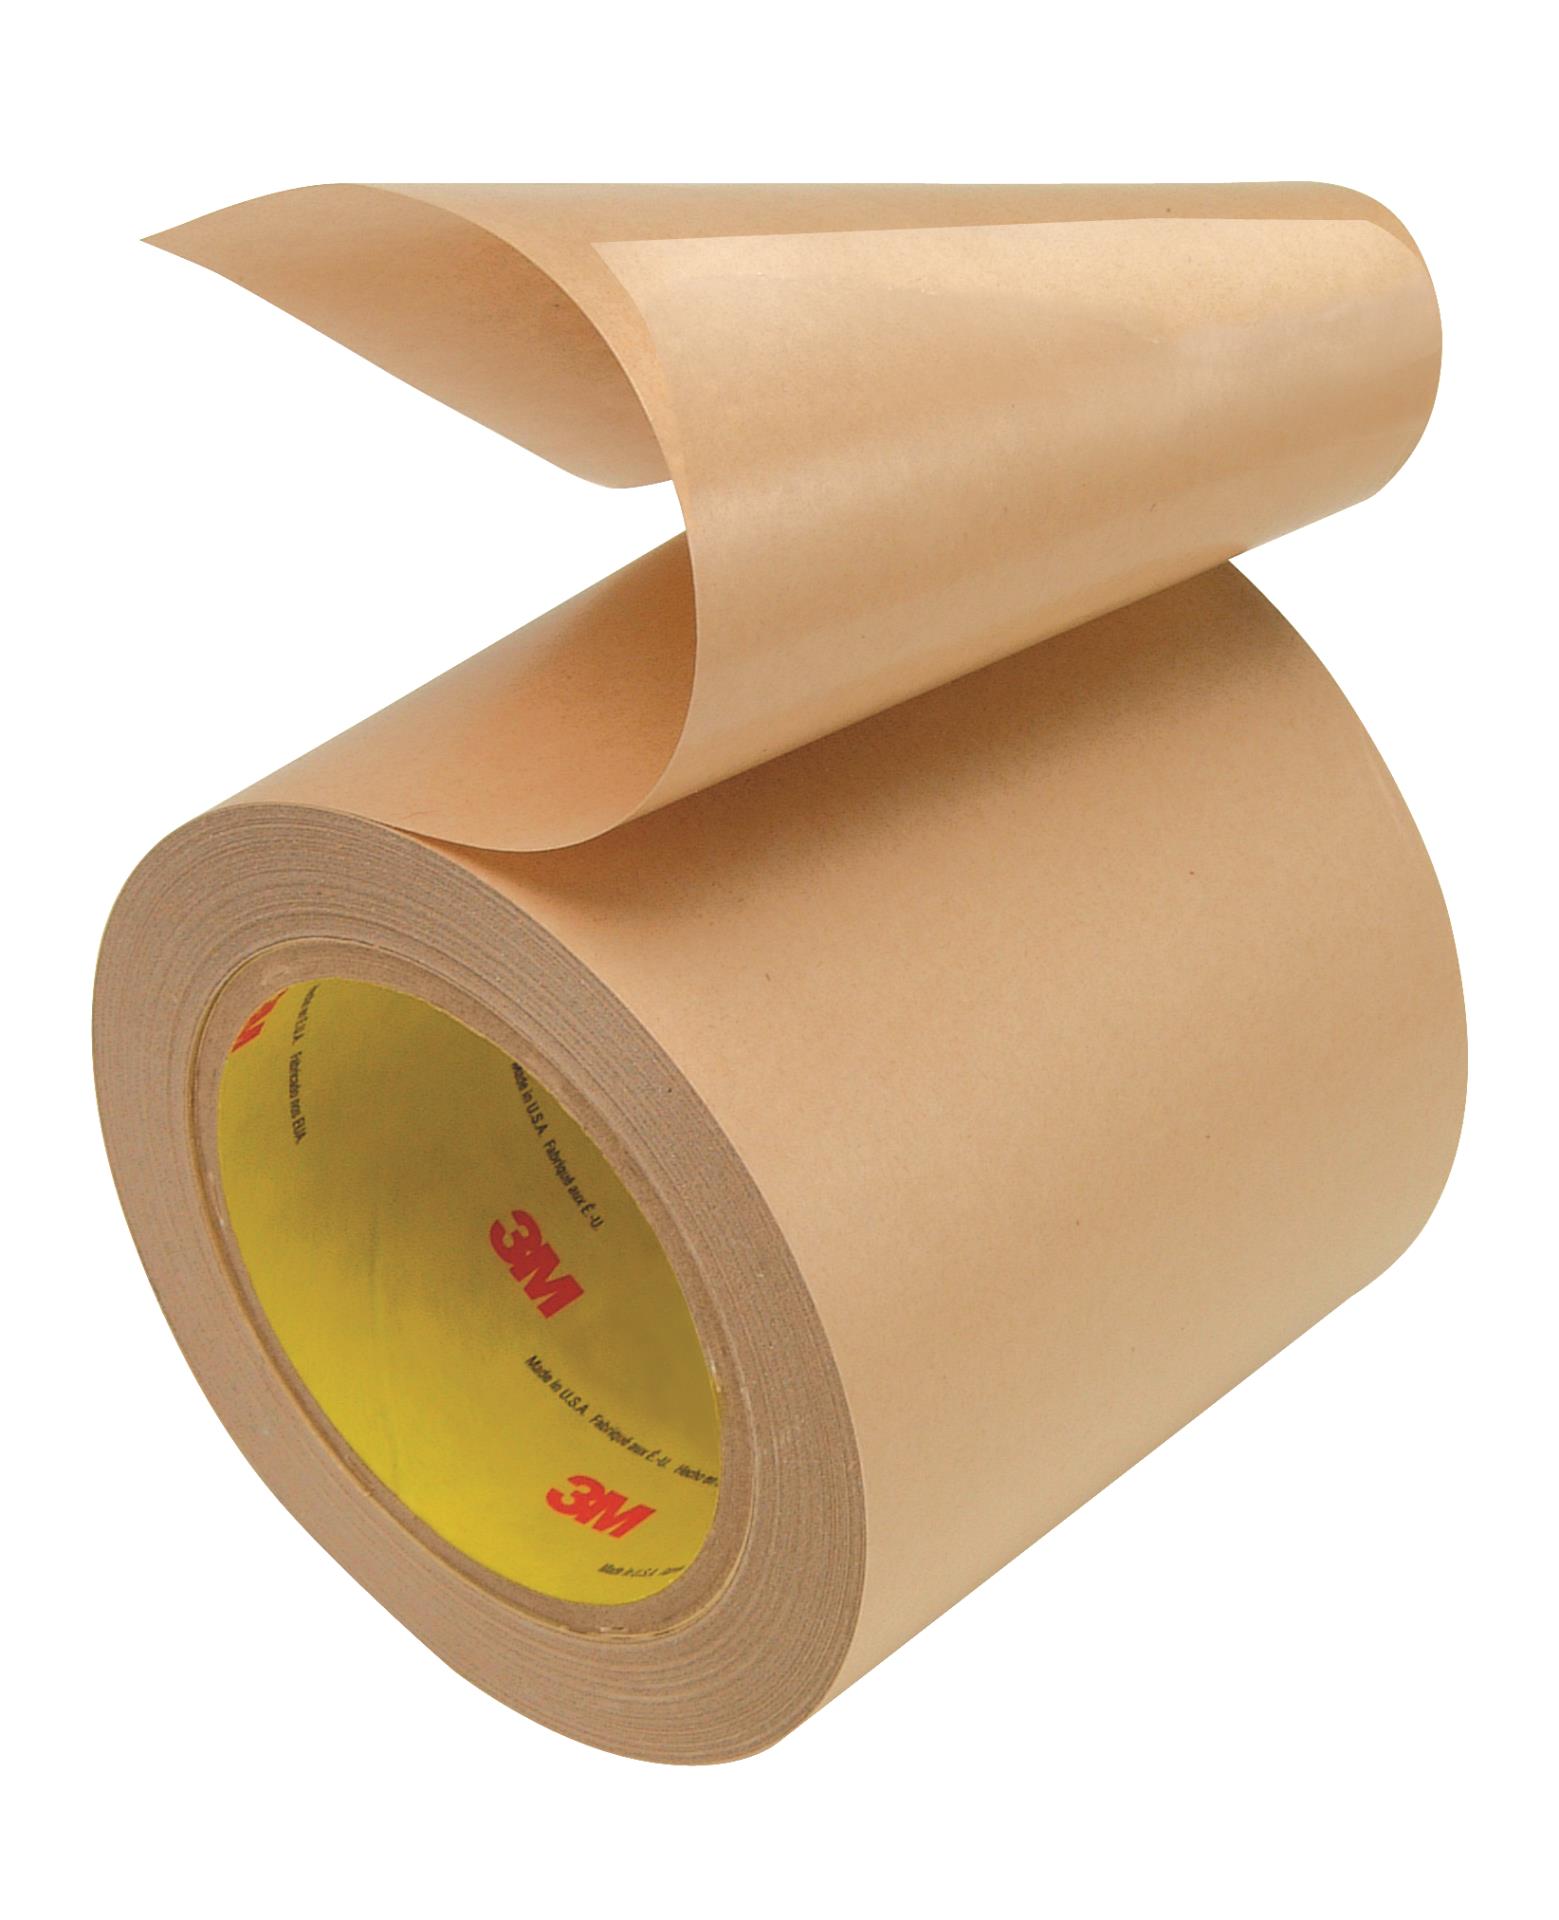 00051115238468 3M™ Electrically Conductive Adhesive Transfer Tape 9703,  24 in x 108 yds, roll per case Aircraft products na 6297274